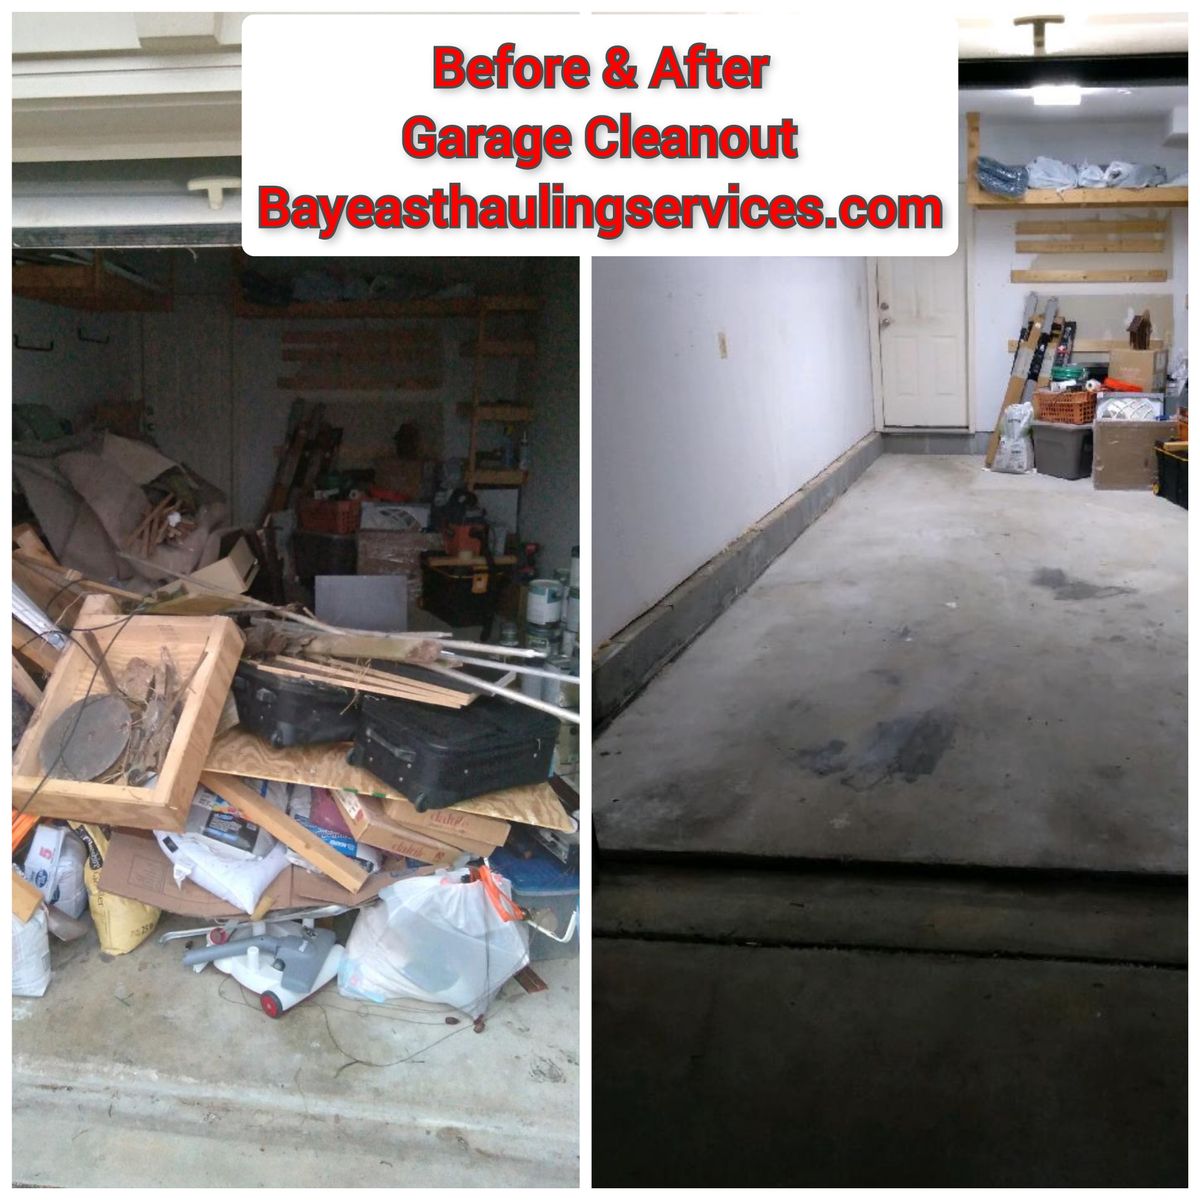 Garage, Attic, & Basement Cleanouts for Bay East Hauling Services & Junk Removal in Grasonville, MD